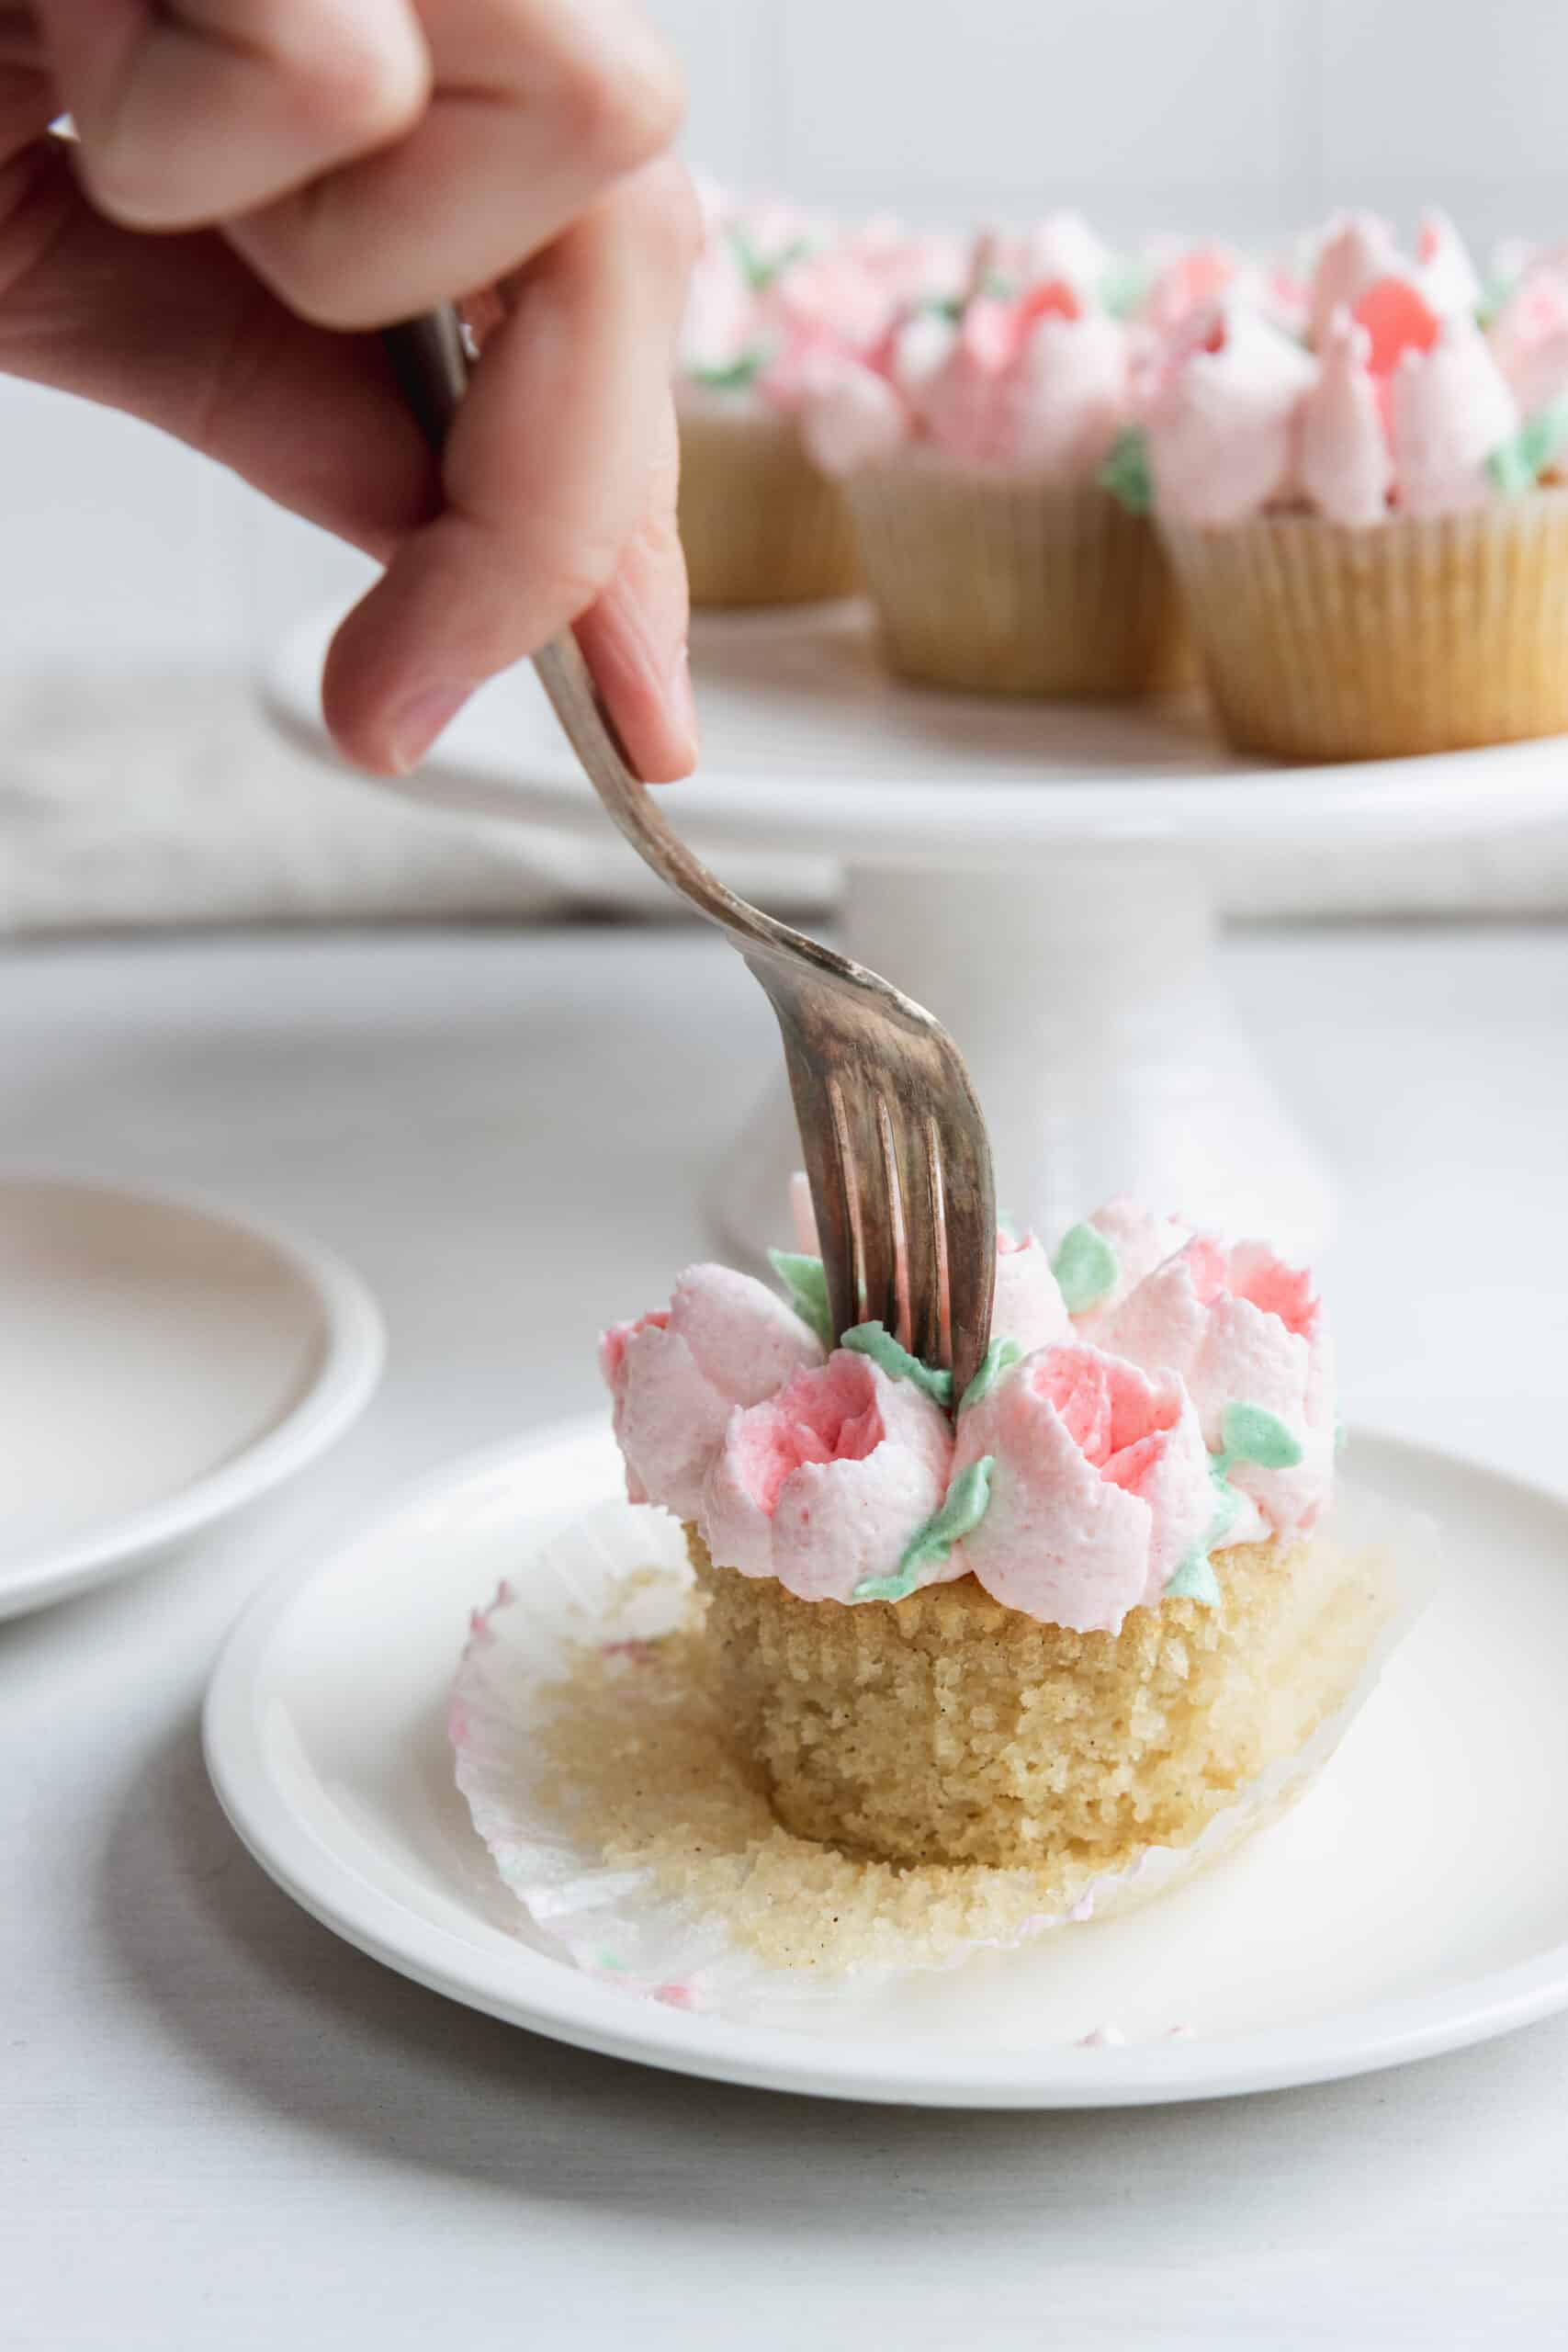 Fork cutting into a cupcake